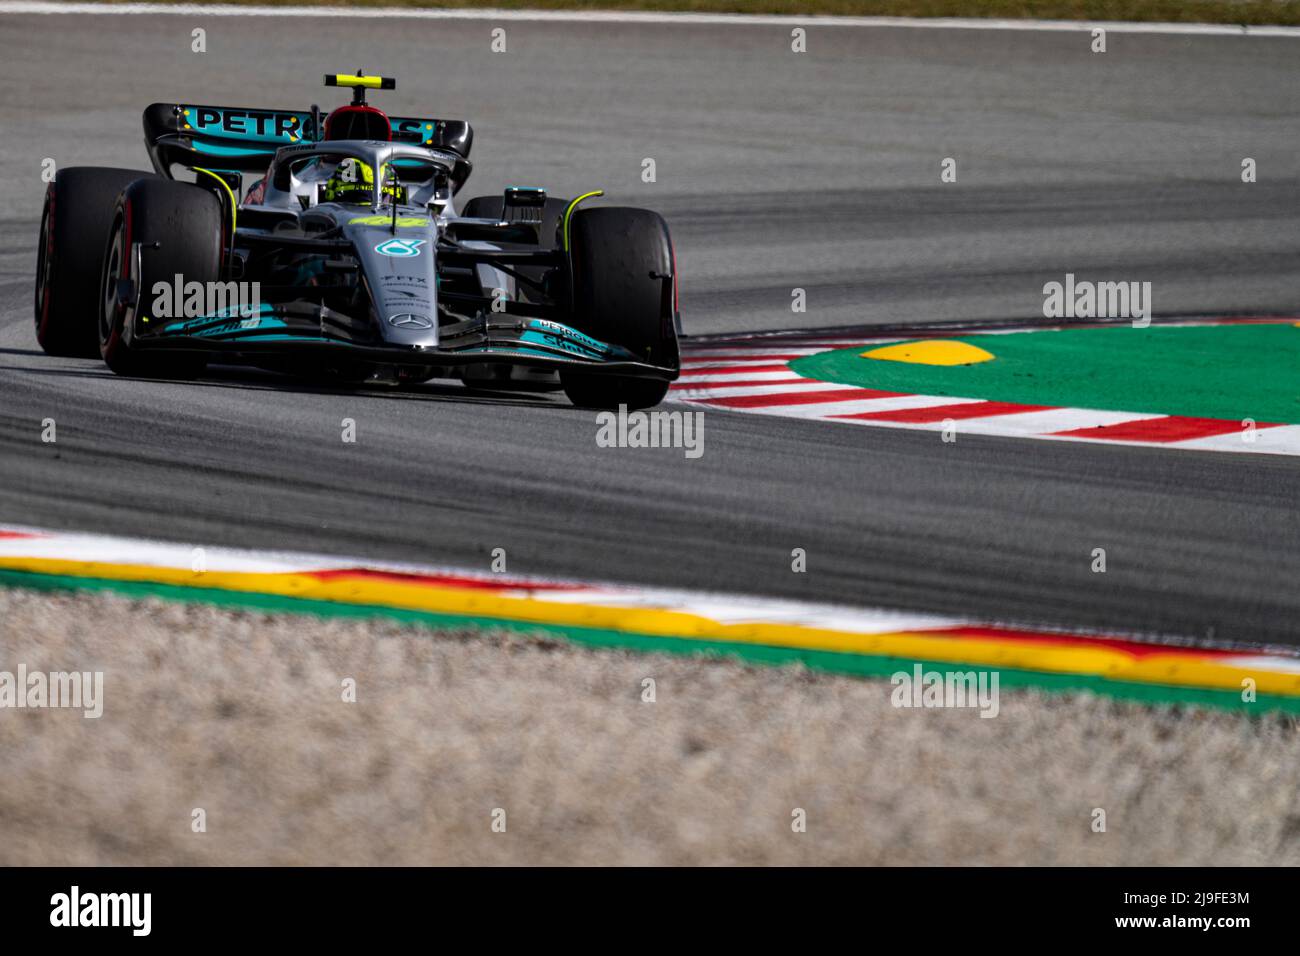 Barcelona, Spain. 21st May, 2022. Lewis Hamilton of Great Britain and Mercedes drives his W13 during qualifying ahead of the F1 Grand Prix of Spain at Circuit de Barcelona-Catalunya on May 21, 2022 in Barcelona, Spain. Foto: Siu Wu. Credit: dpa/Alamy Live News Stock Photo